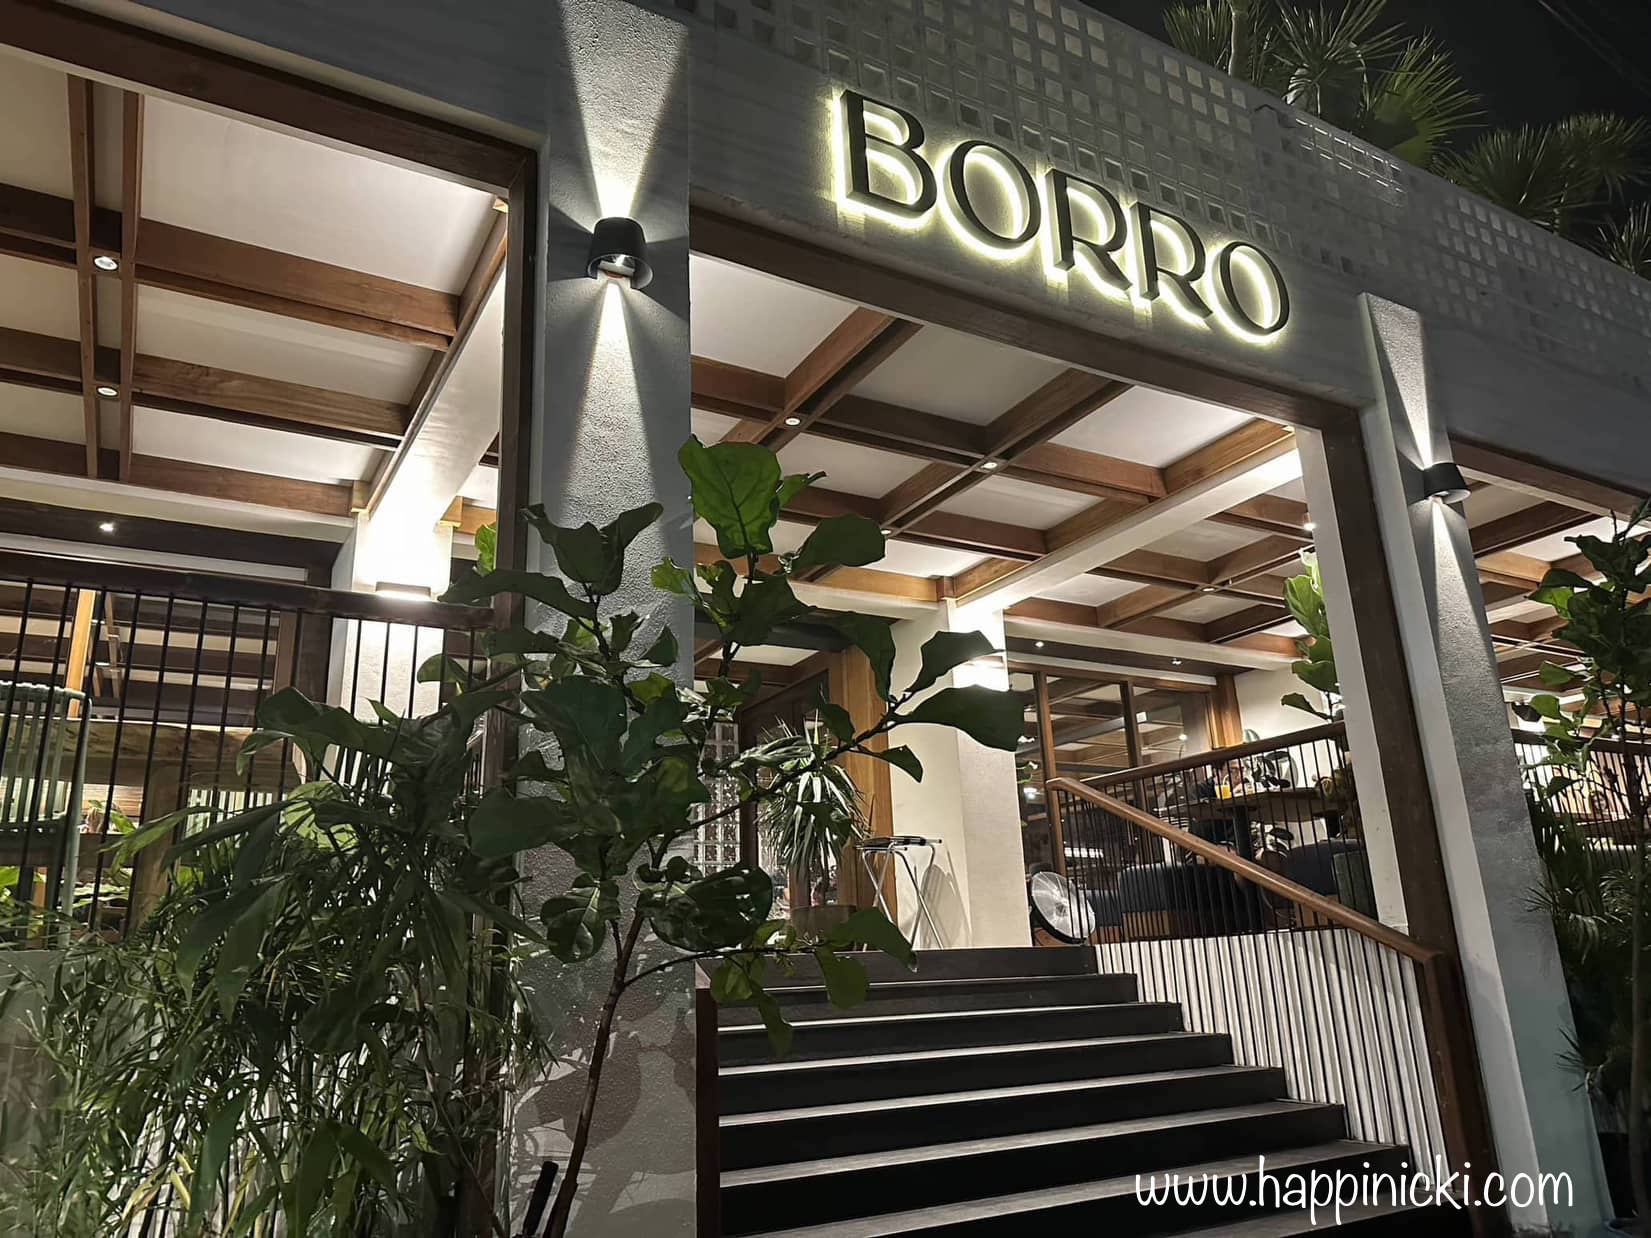 Now We Understand Why People Have Been Raving About Borro Manila